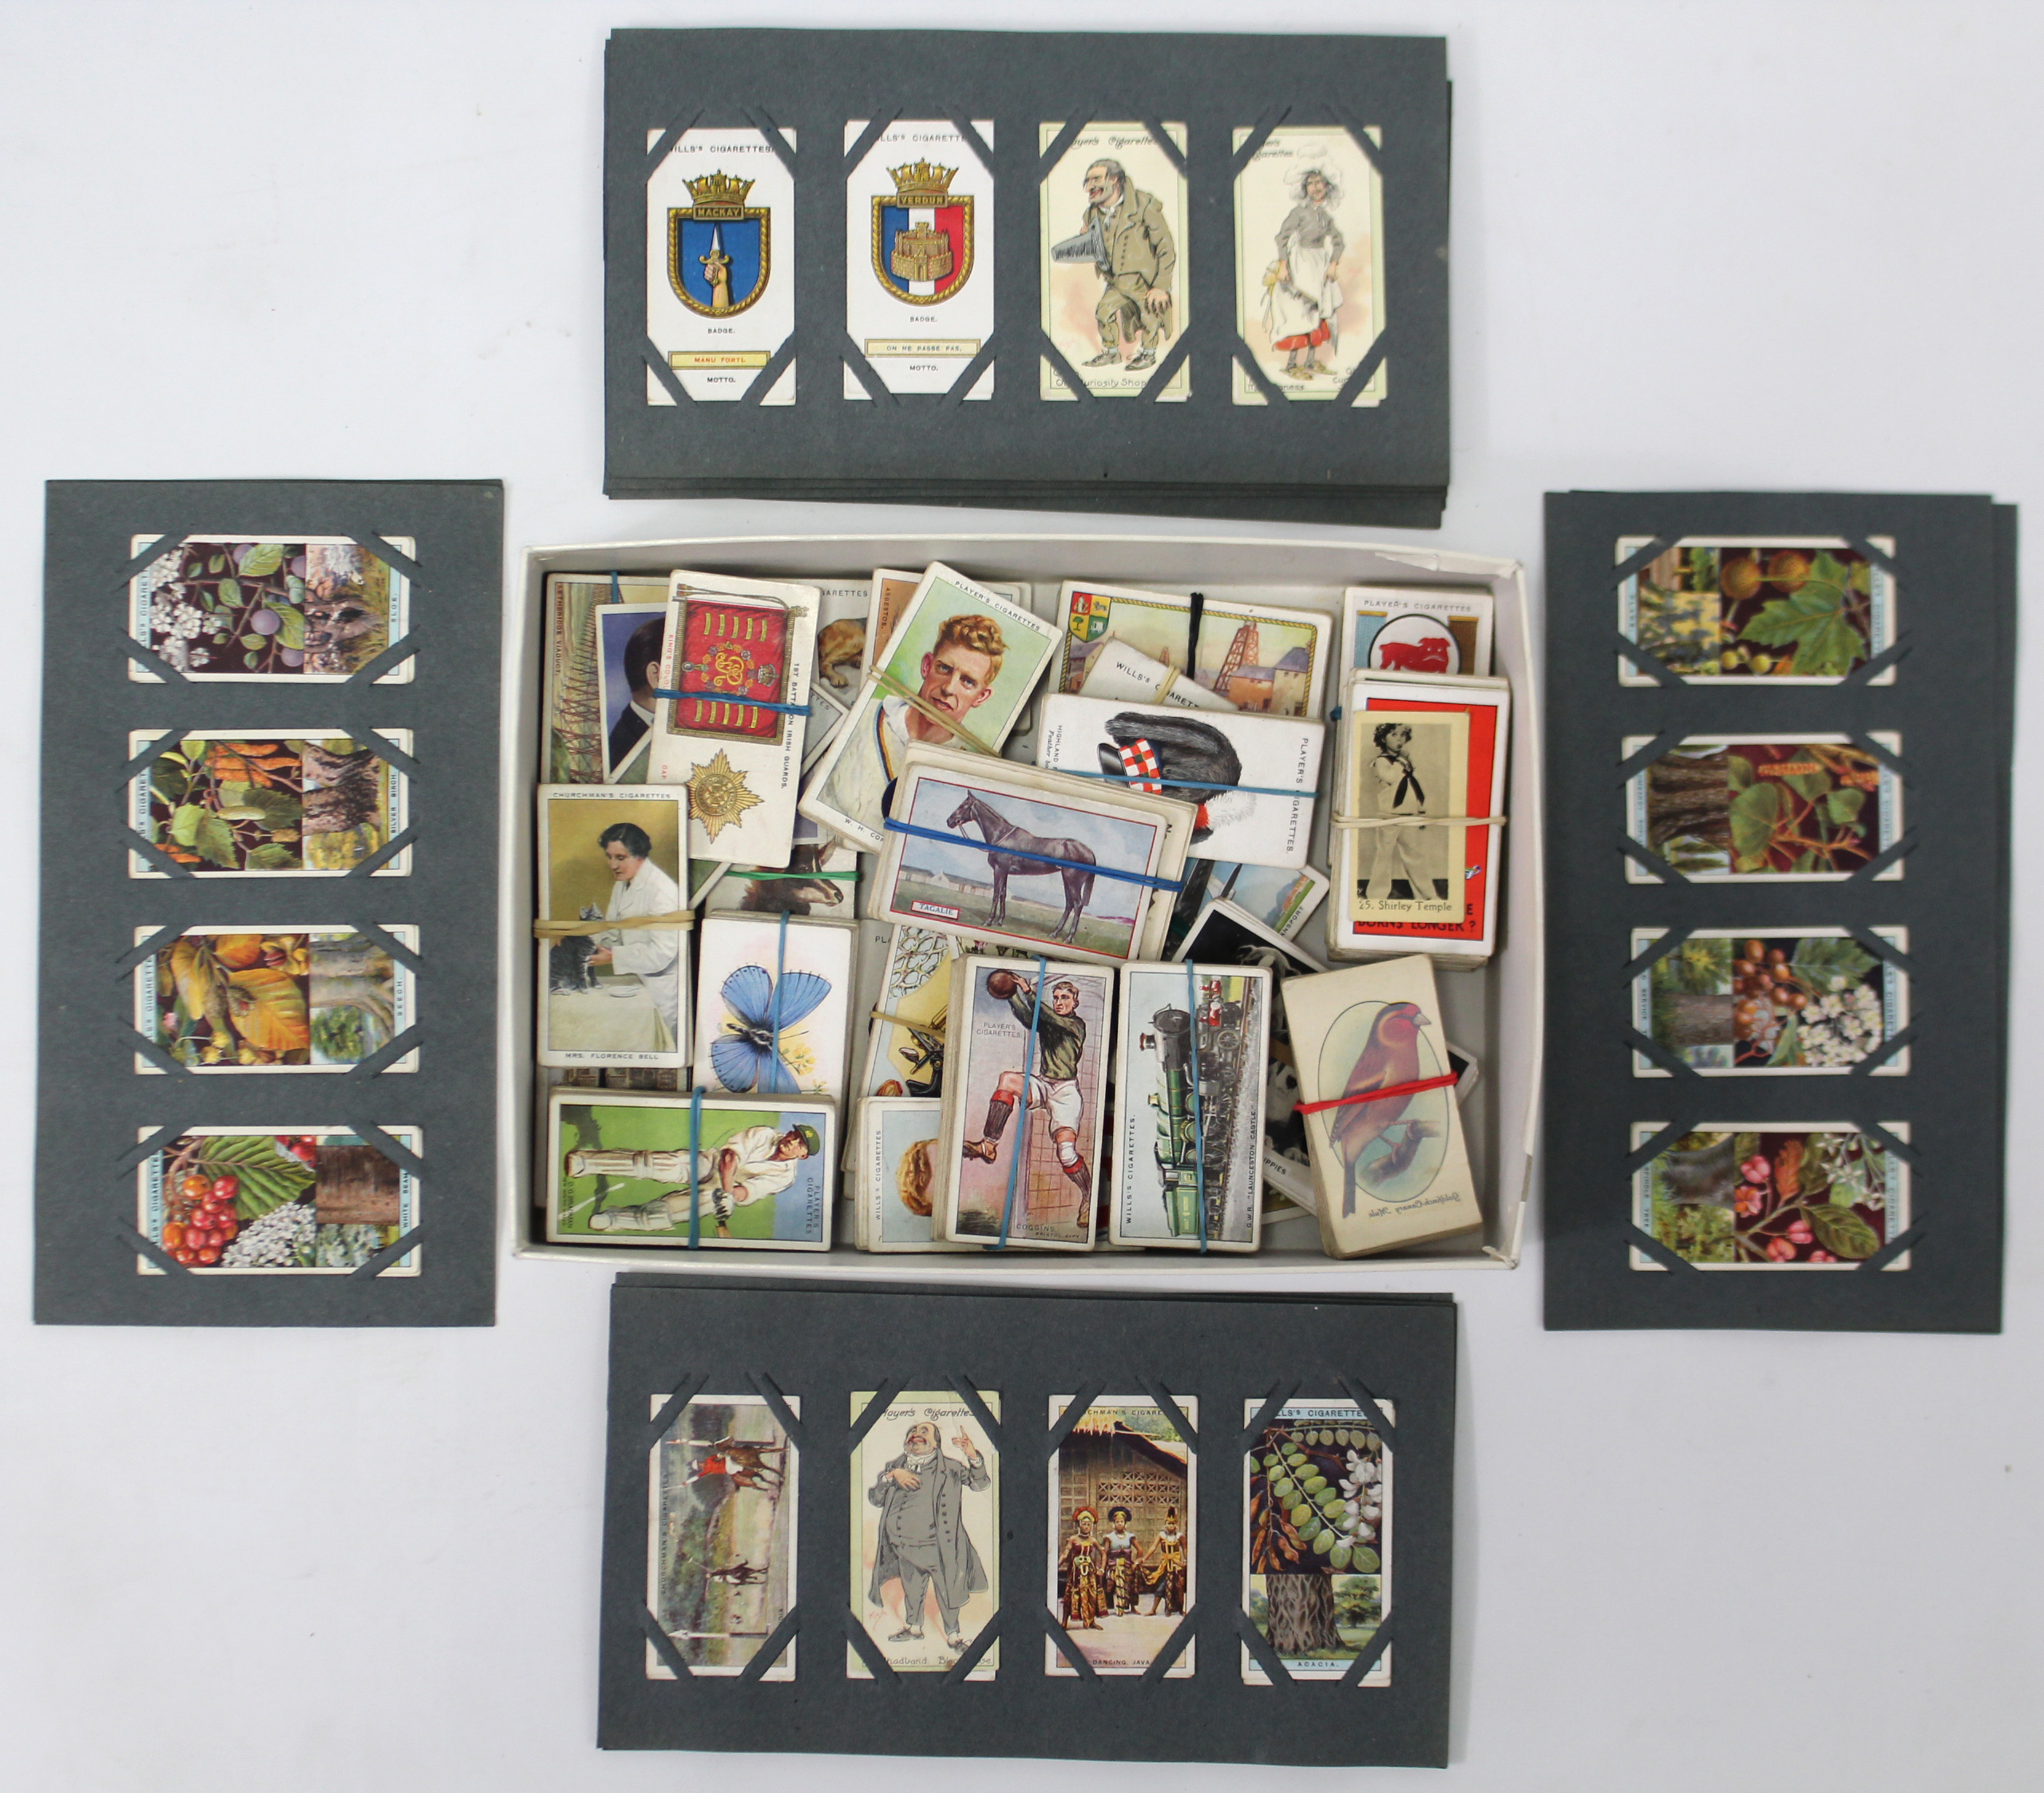 Approximately five hundred various cigarette cards by John Player, W. D. & H. O. Wills, etc.,